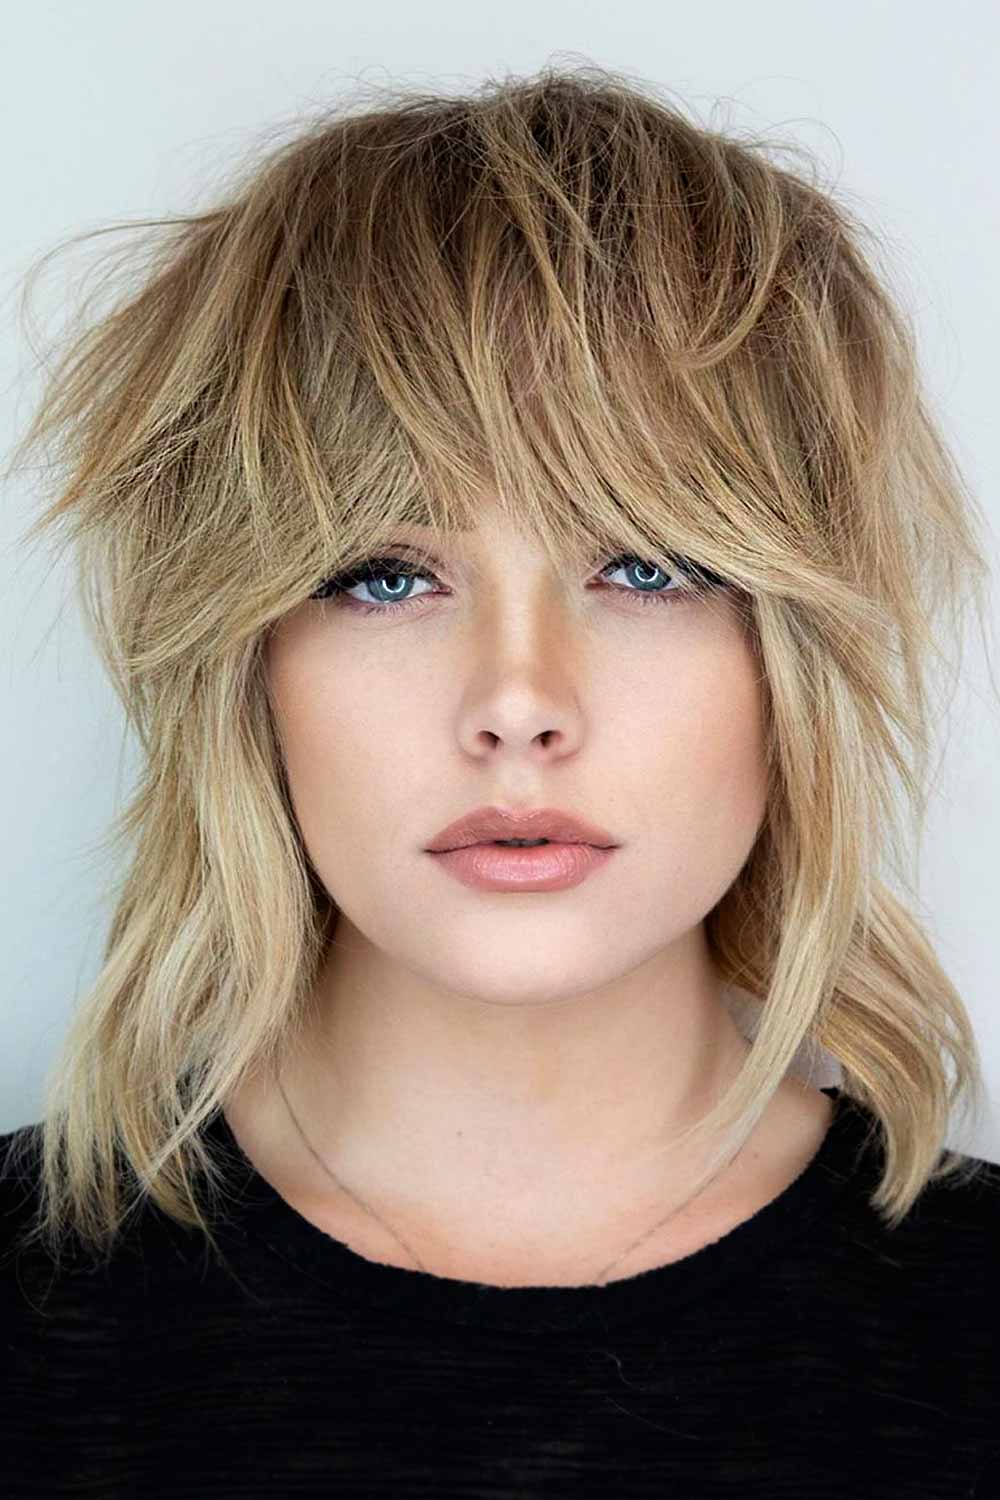 Shaggy Hairstyles With Fringe #mediumhaircut #layeredhaircut #blonde